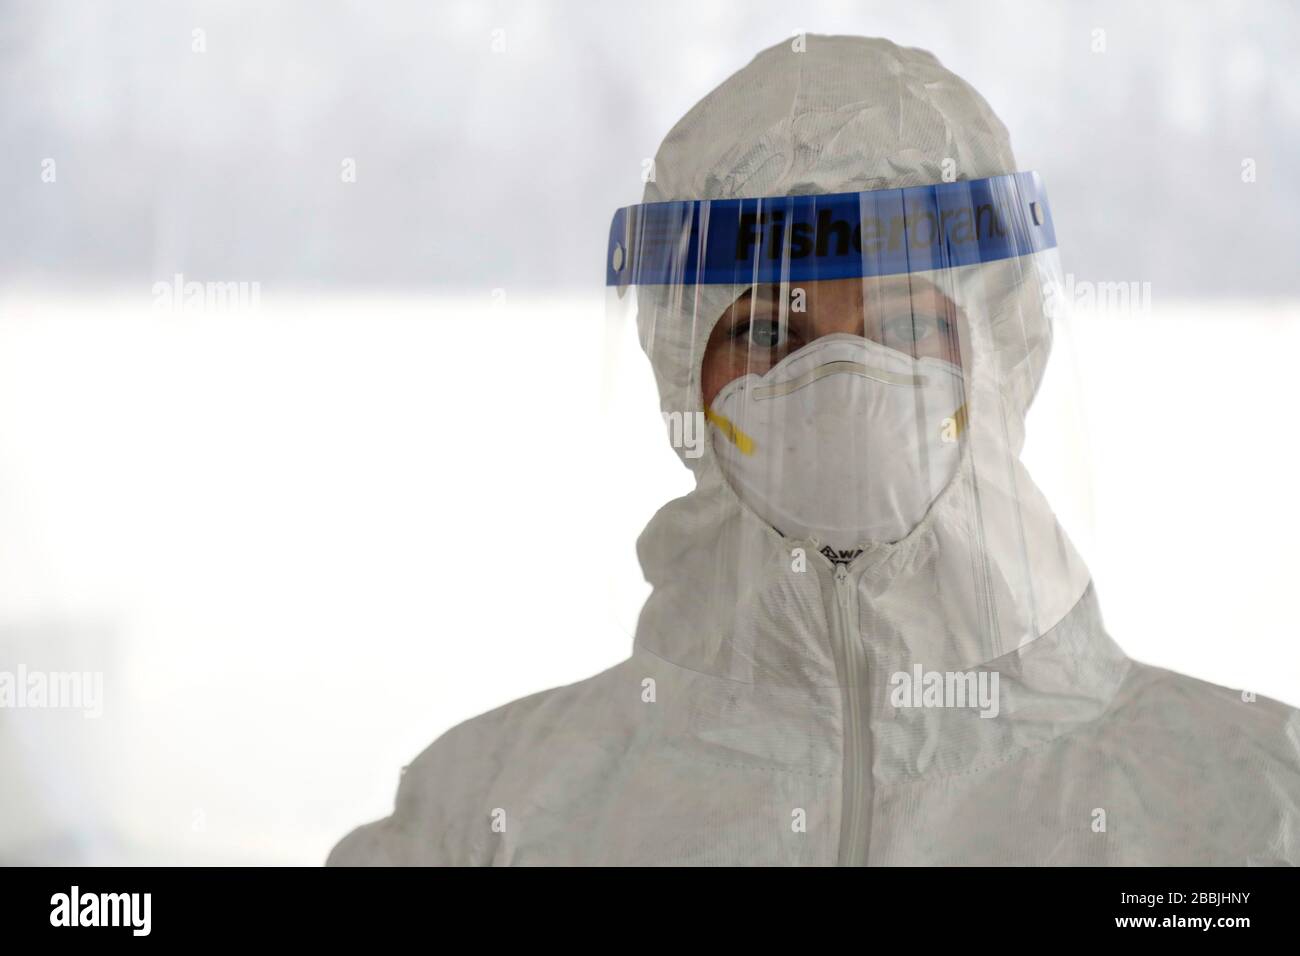 U.S. Army Sgt. Cora Brown is trained in proper use of protective gear before assisting with COVID-19, coronavirus pandemic testing at Community College of Rhode Island March 30, 2020 in Warwick, Rhode Island. Stock Photo